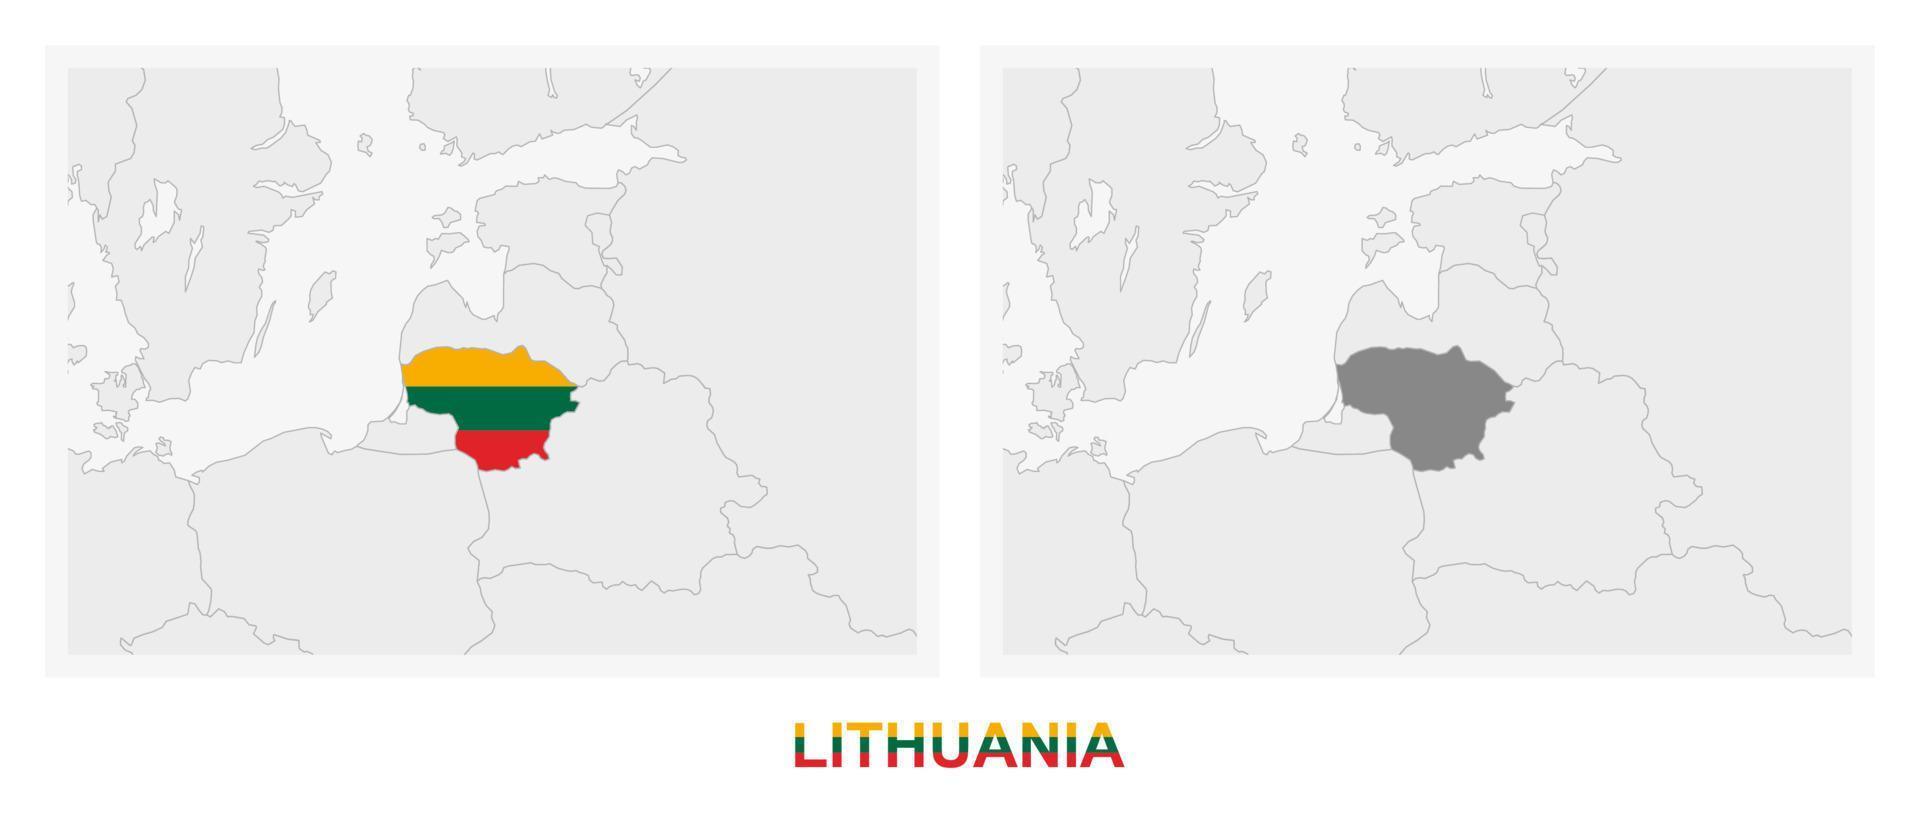 Two versions of the map of Lithuania, with the flag of Lithuania and highlighted in dark grey. vector